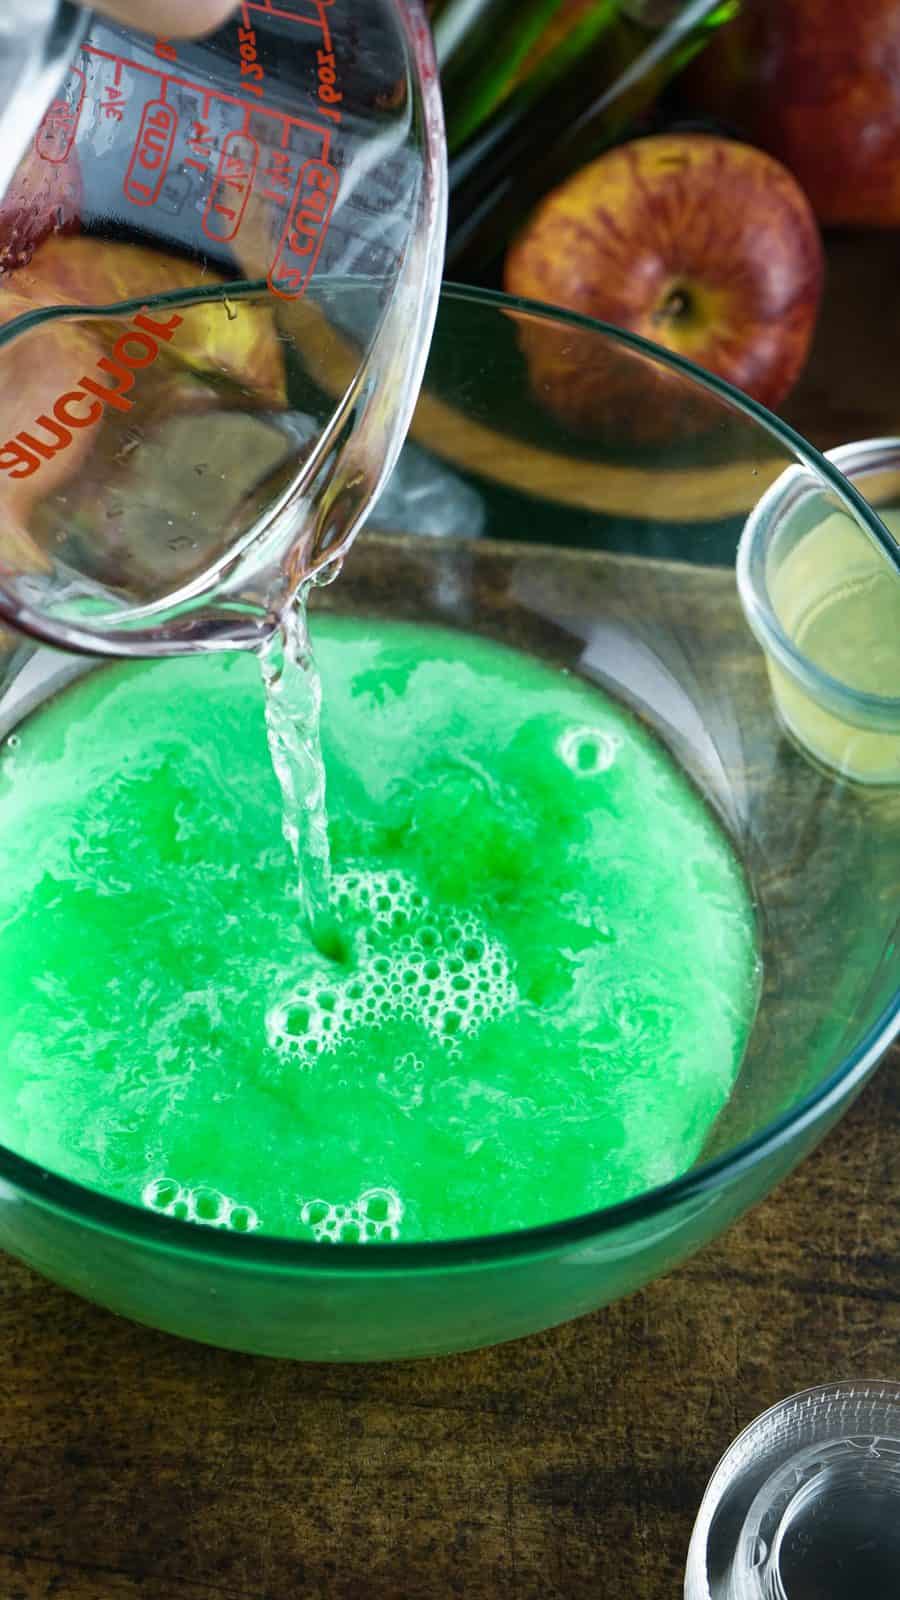 Vodka and lime juice being added to jell-o mixture in bowl.